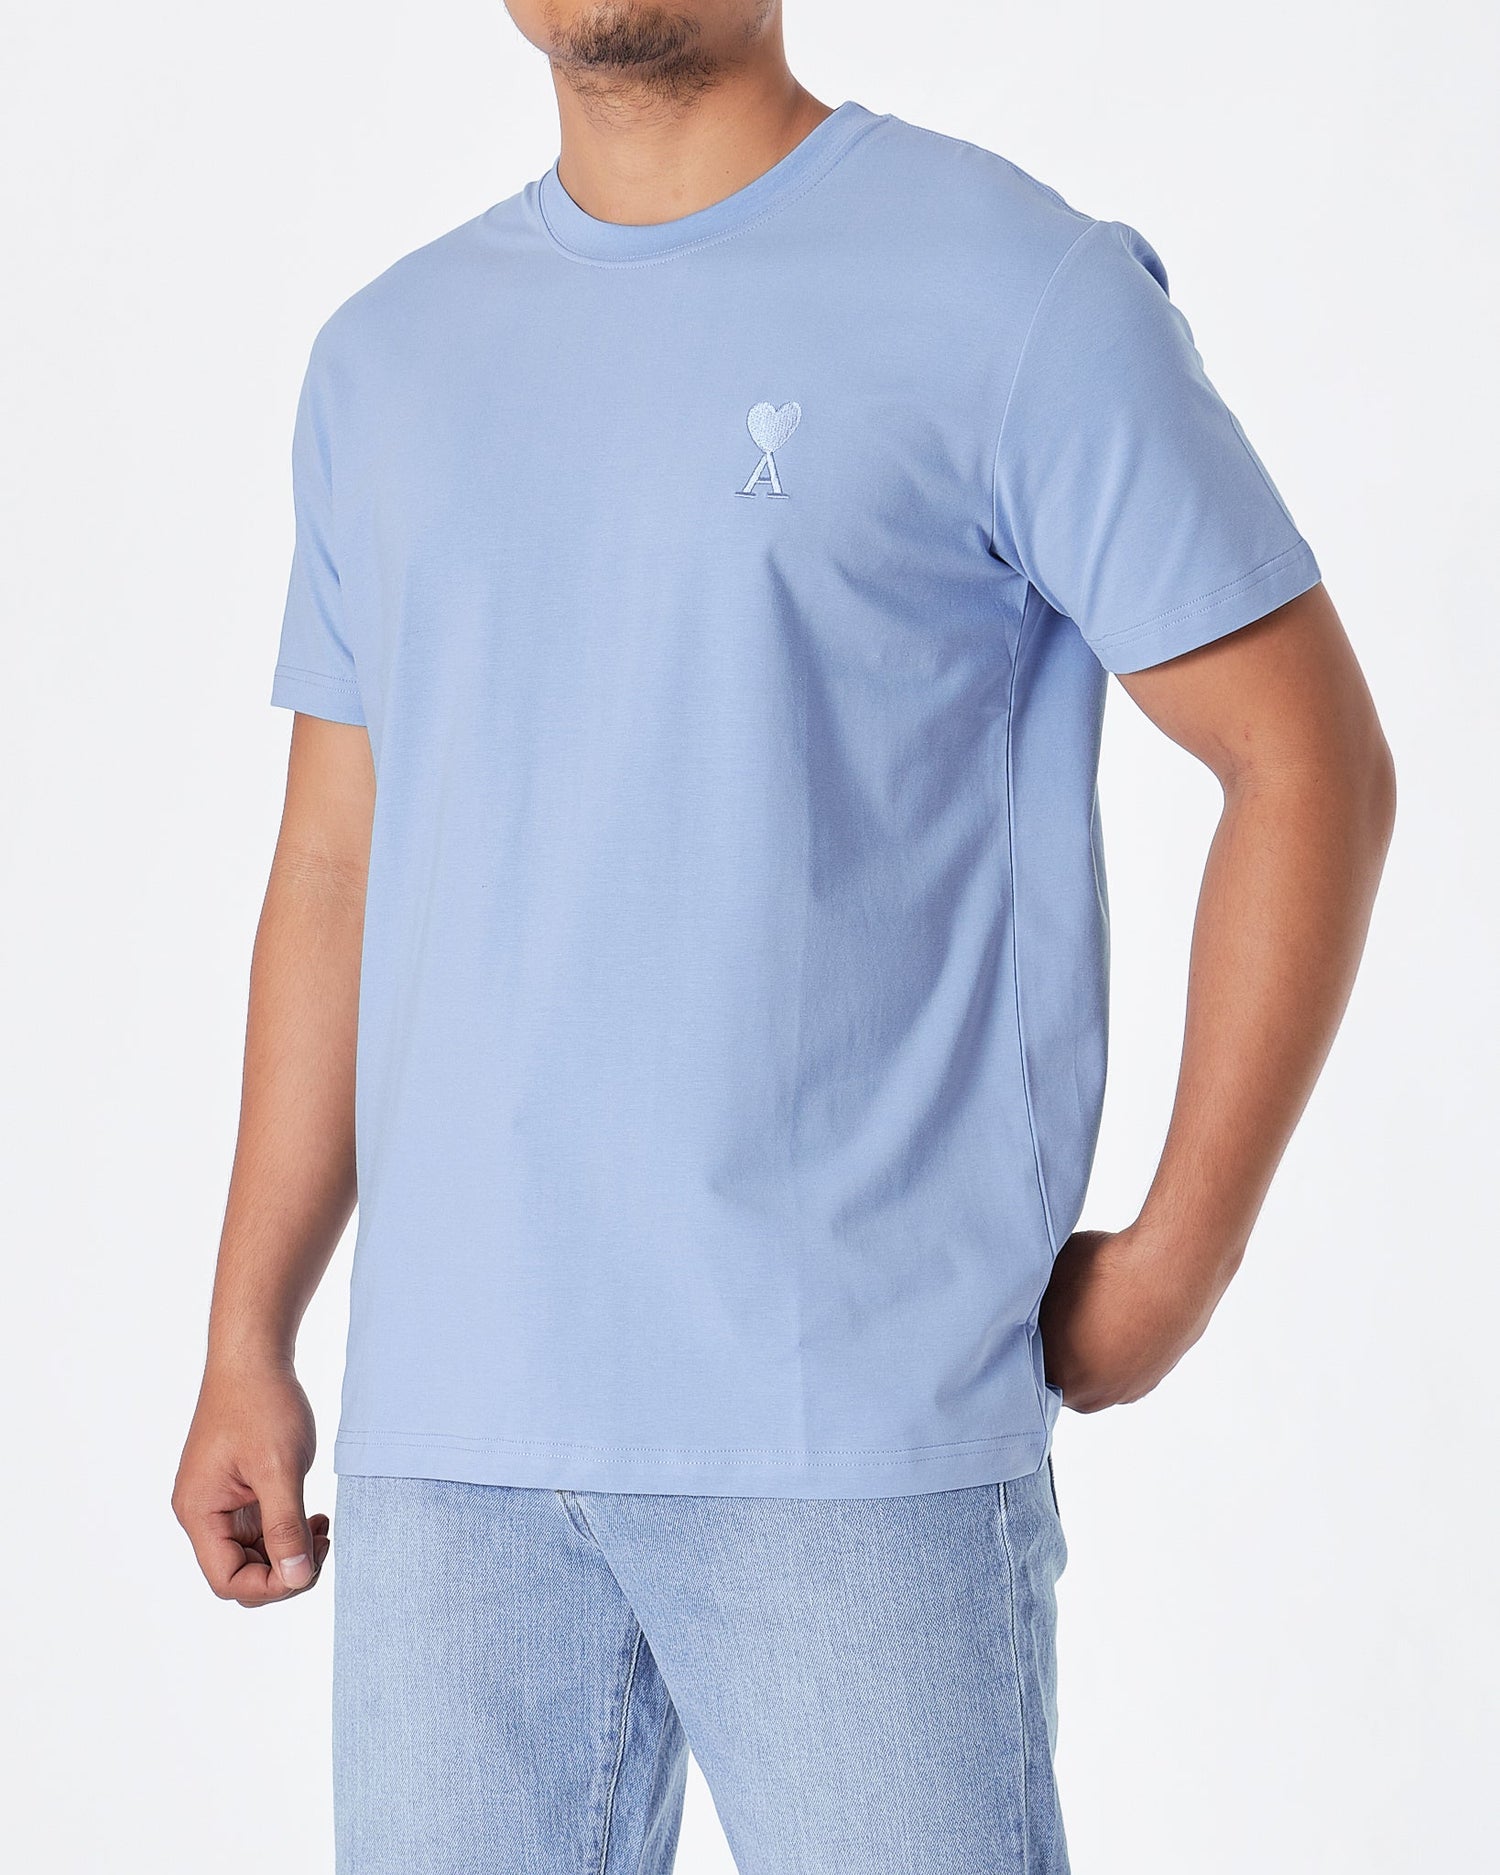 MOI OUTFIT-AMI Heart Embroidered Men Blue T-Shirt 15.50